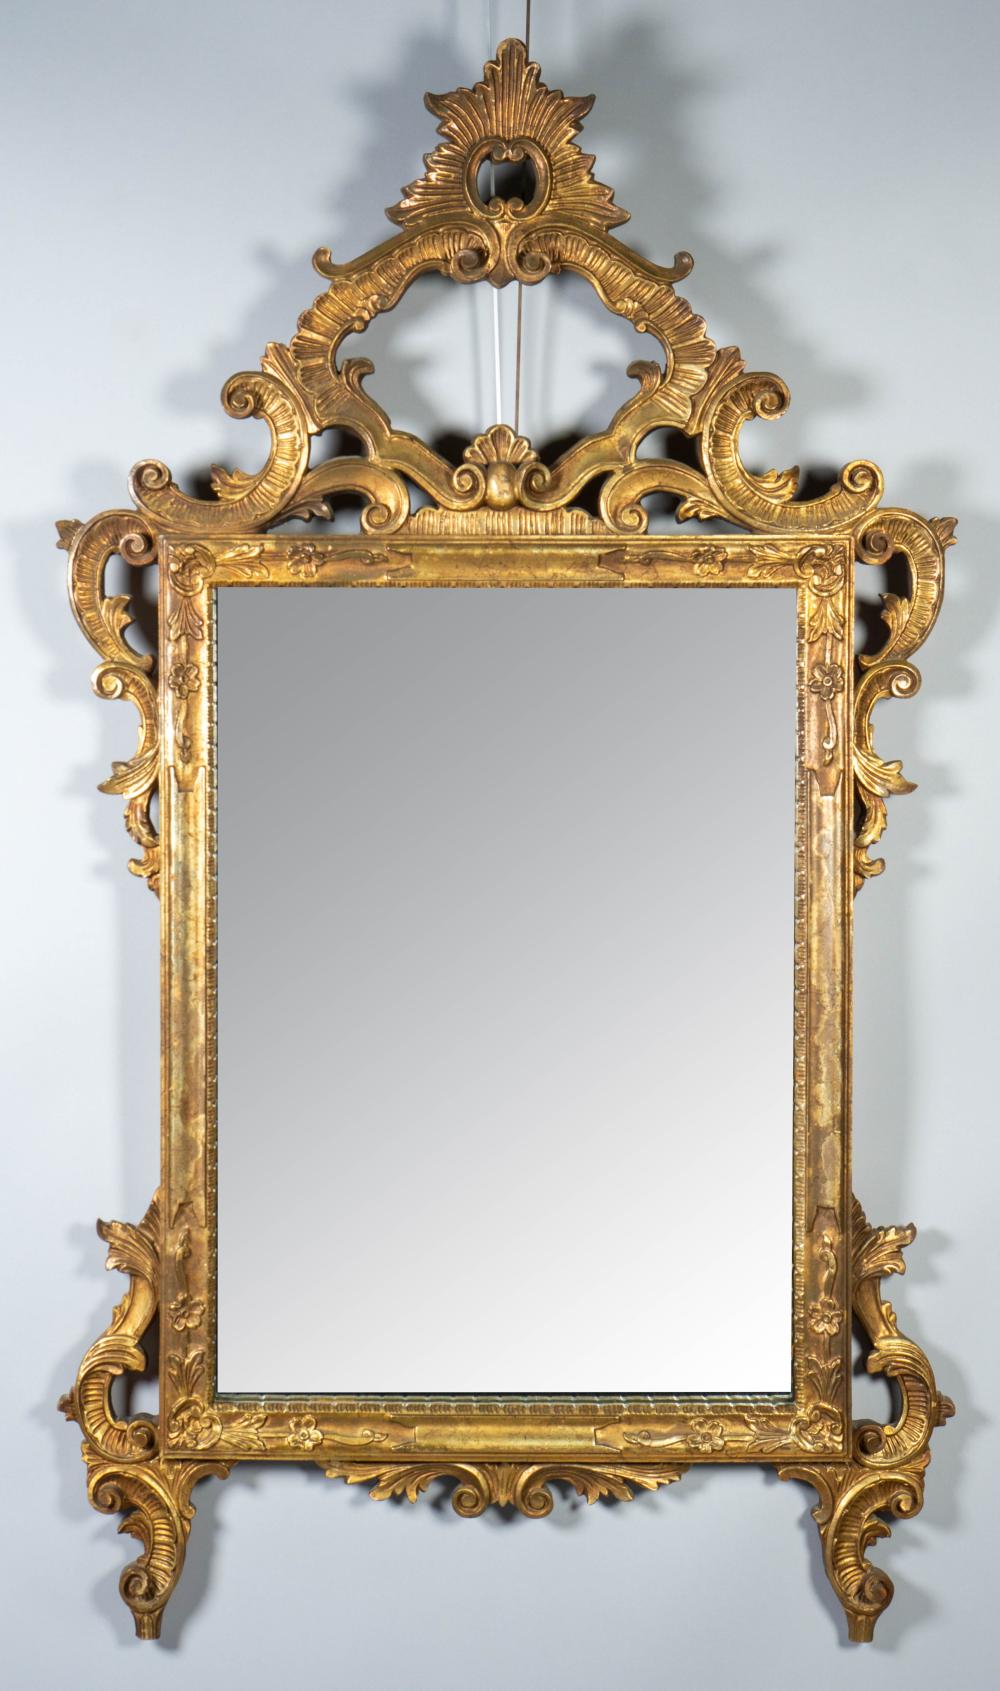 ROCOCO STYLE GOLD PAINTED WOOD 33c7cb